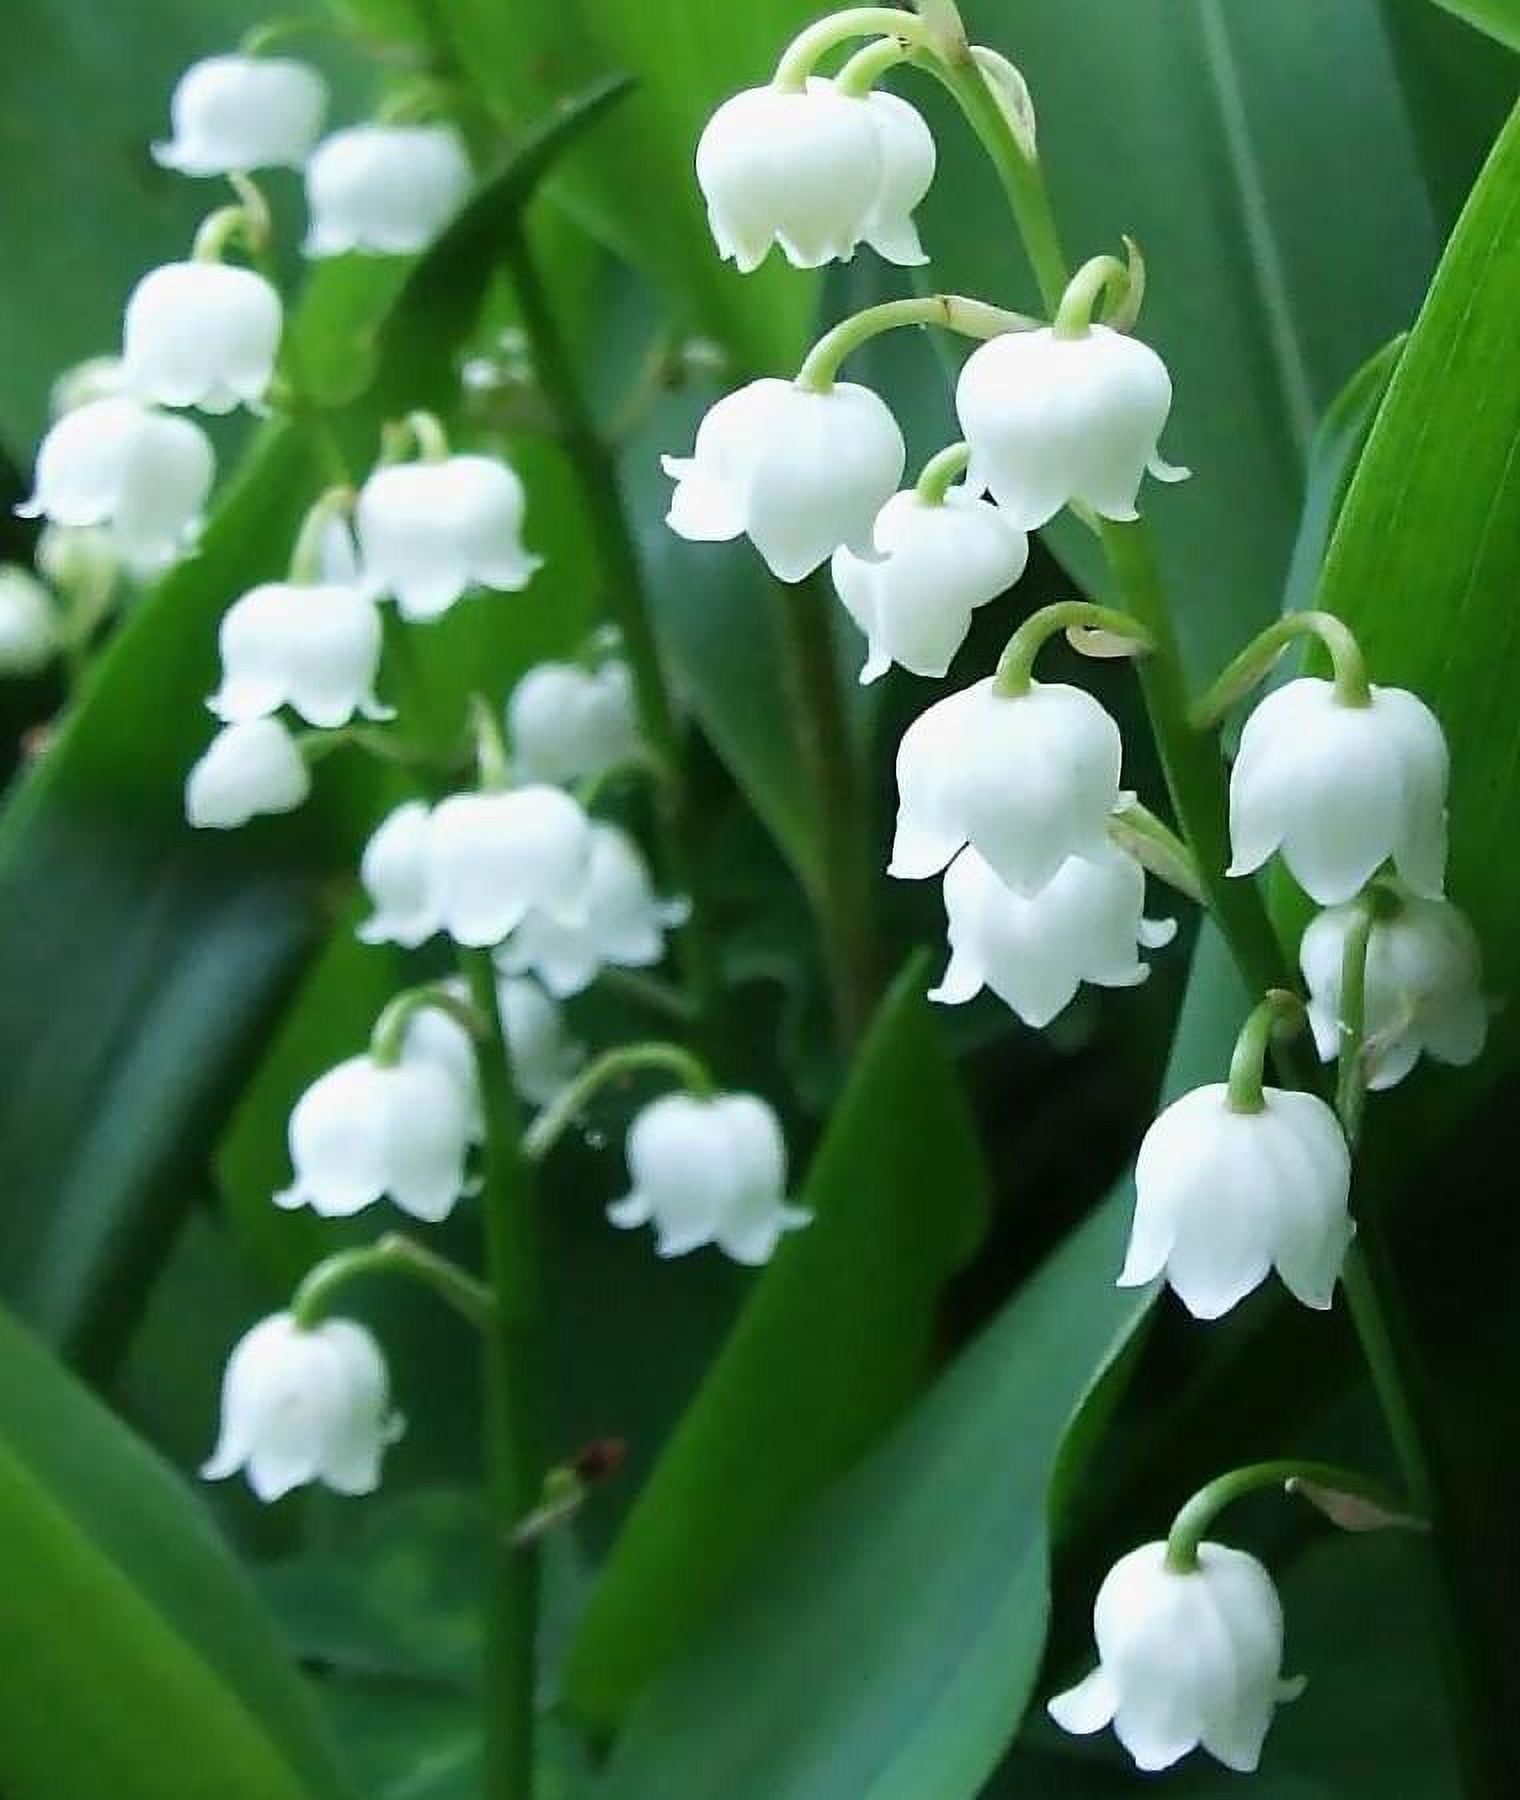 Fragrant lily of the valley typically blooms in May